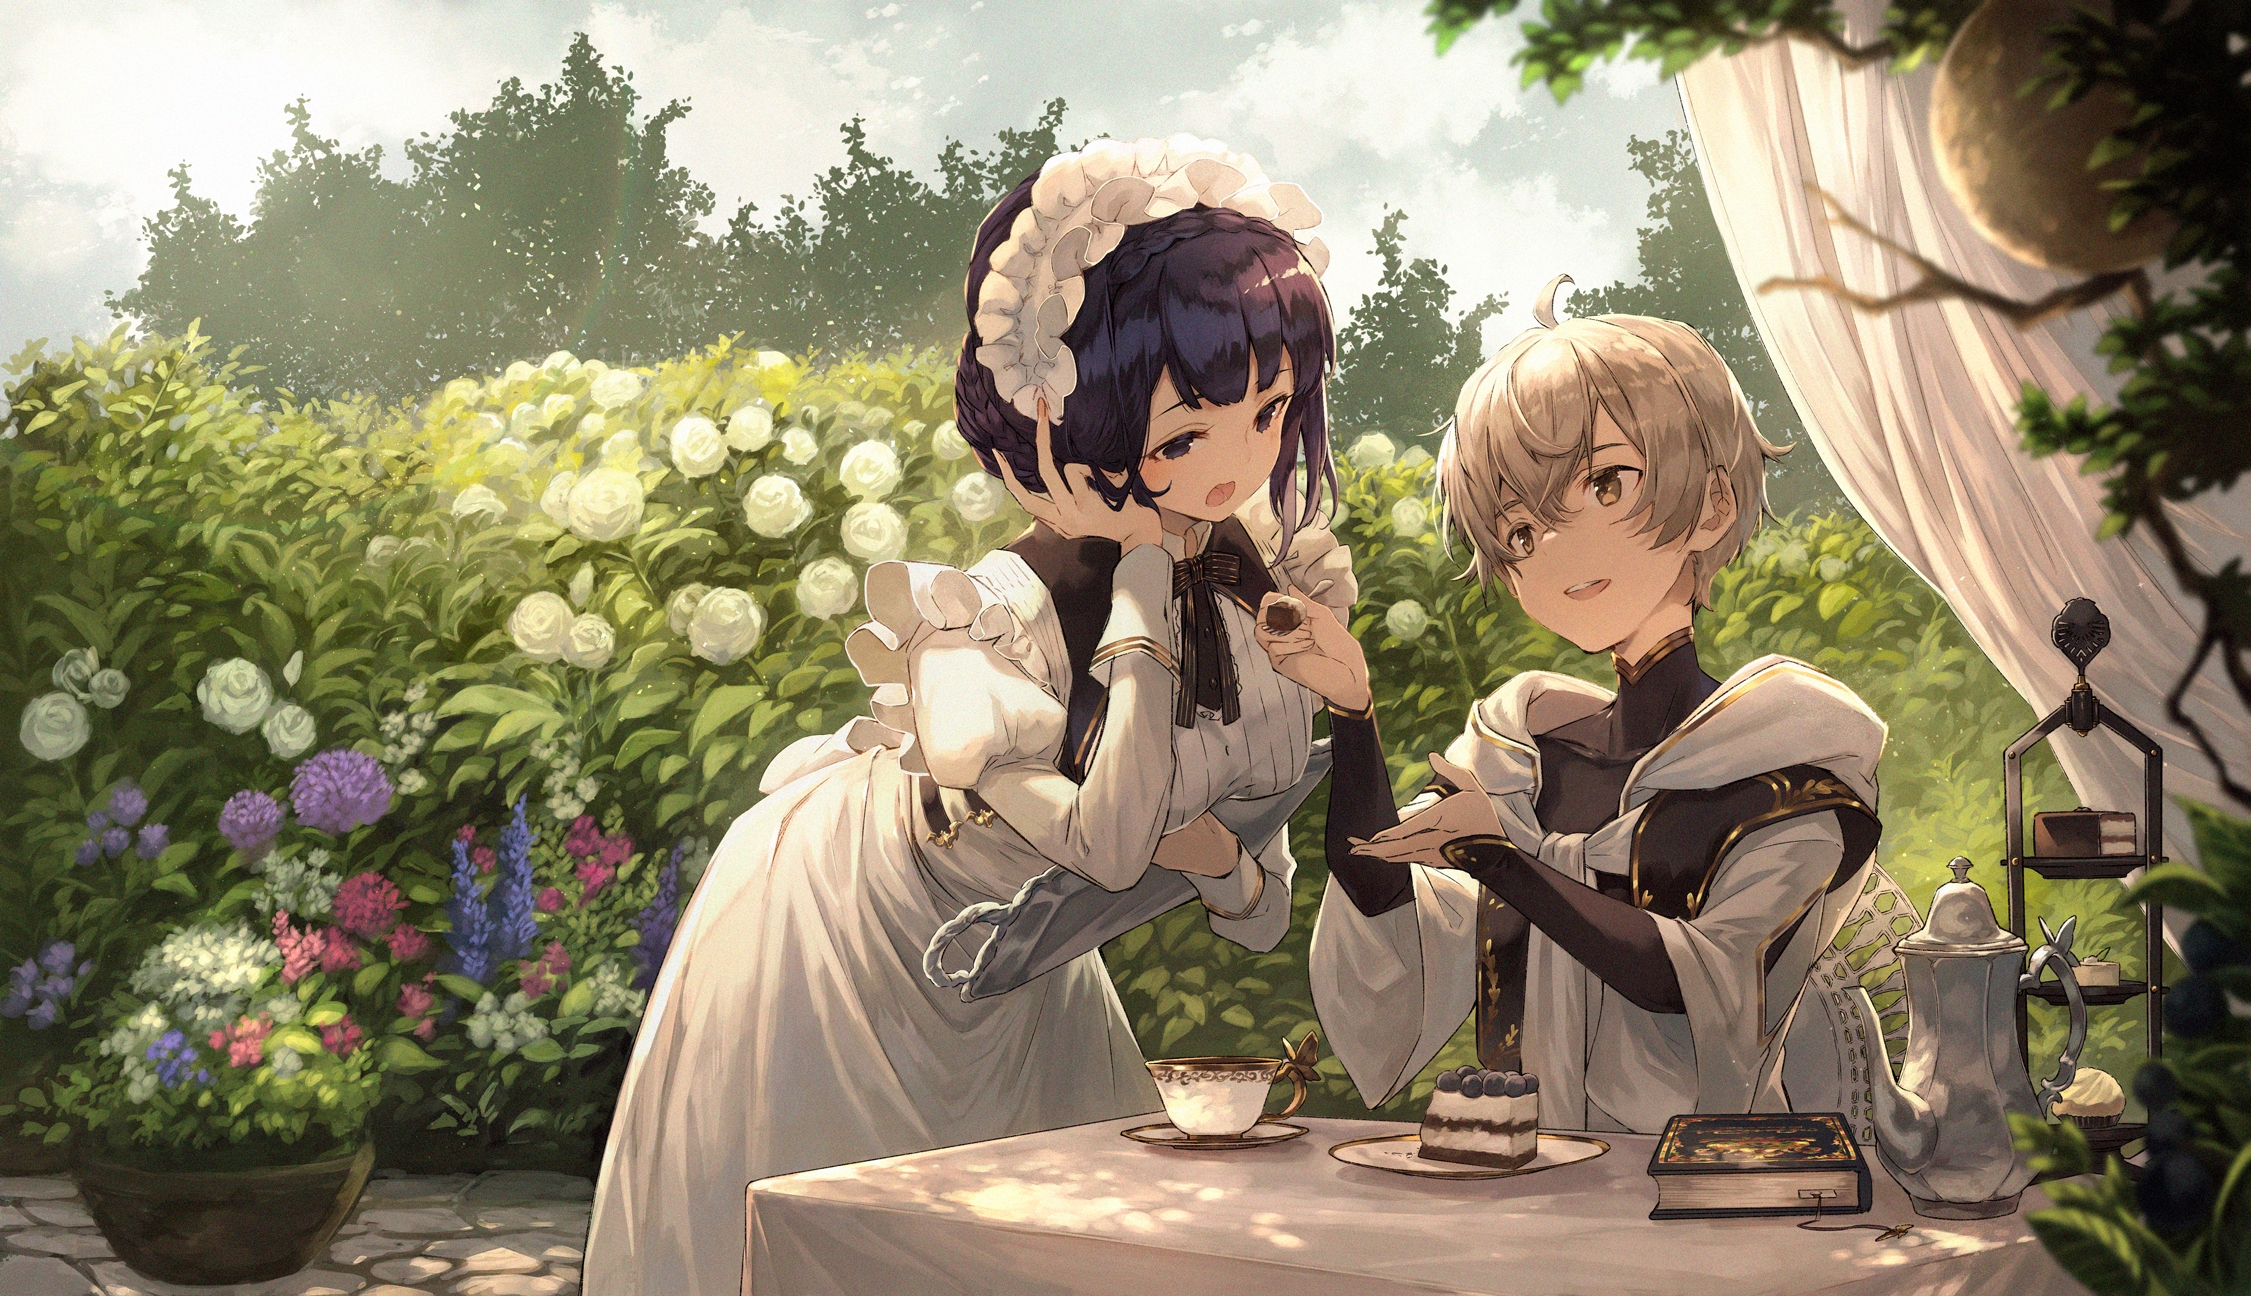 Photo cute, desert, romantic, maid outfit, cake, Wallpaper Anime Boy And  Maid, anime - free pictures on Fonwall